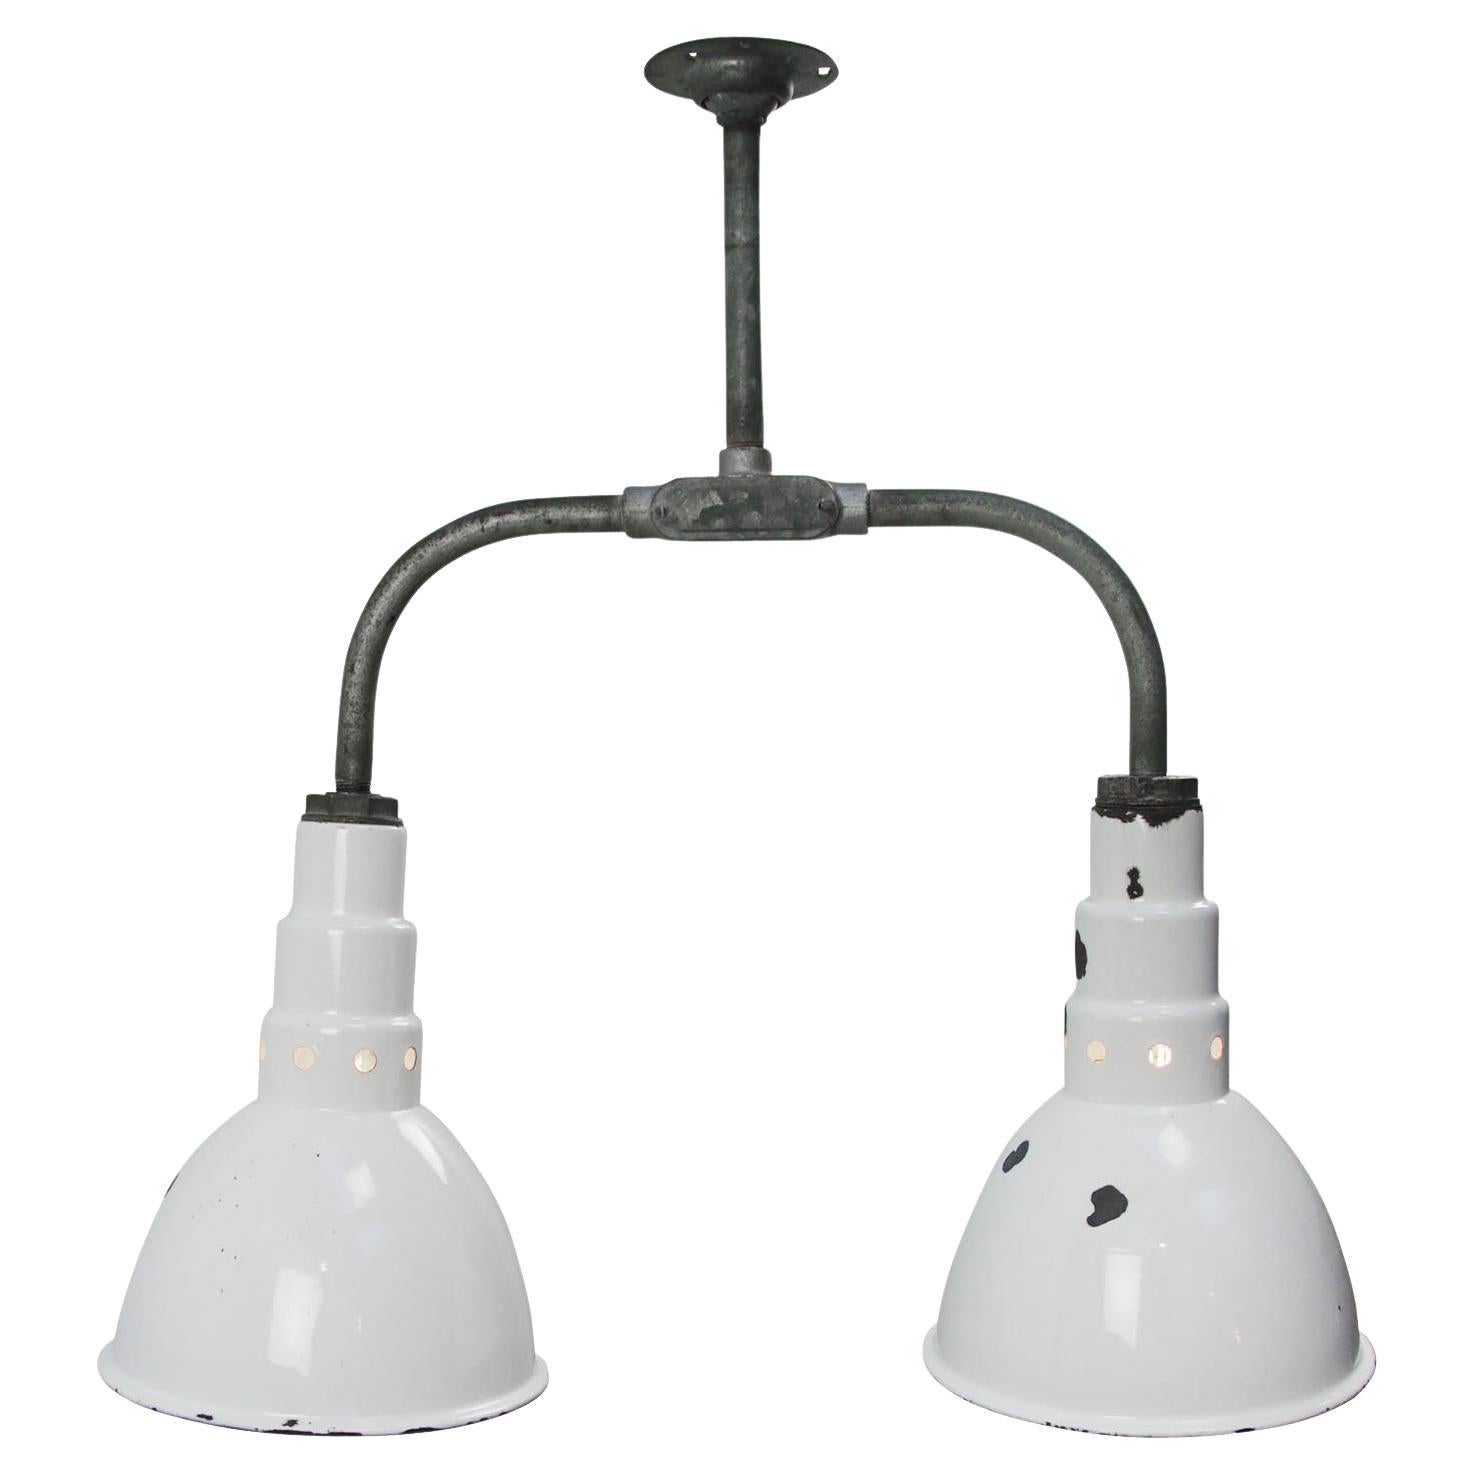 Double White Enamel Vintage Industrial Factory Pendant Lights by Benjamin USA